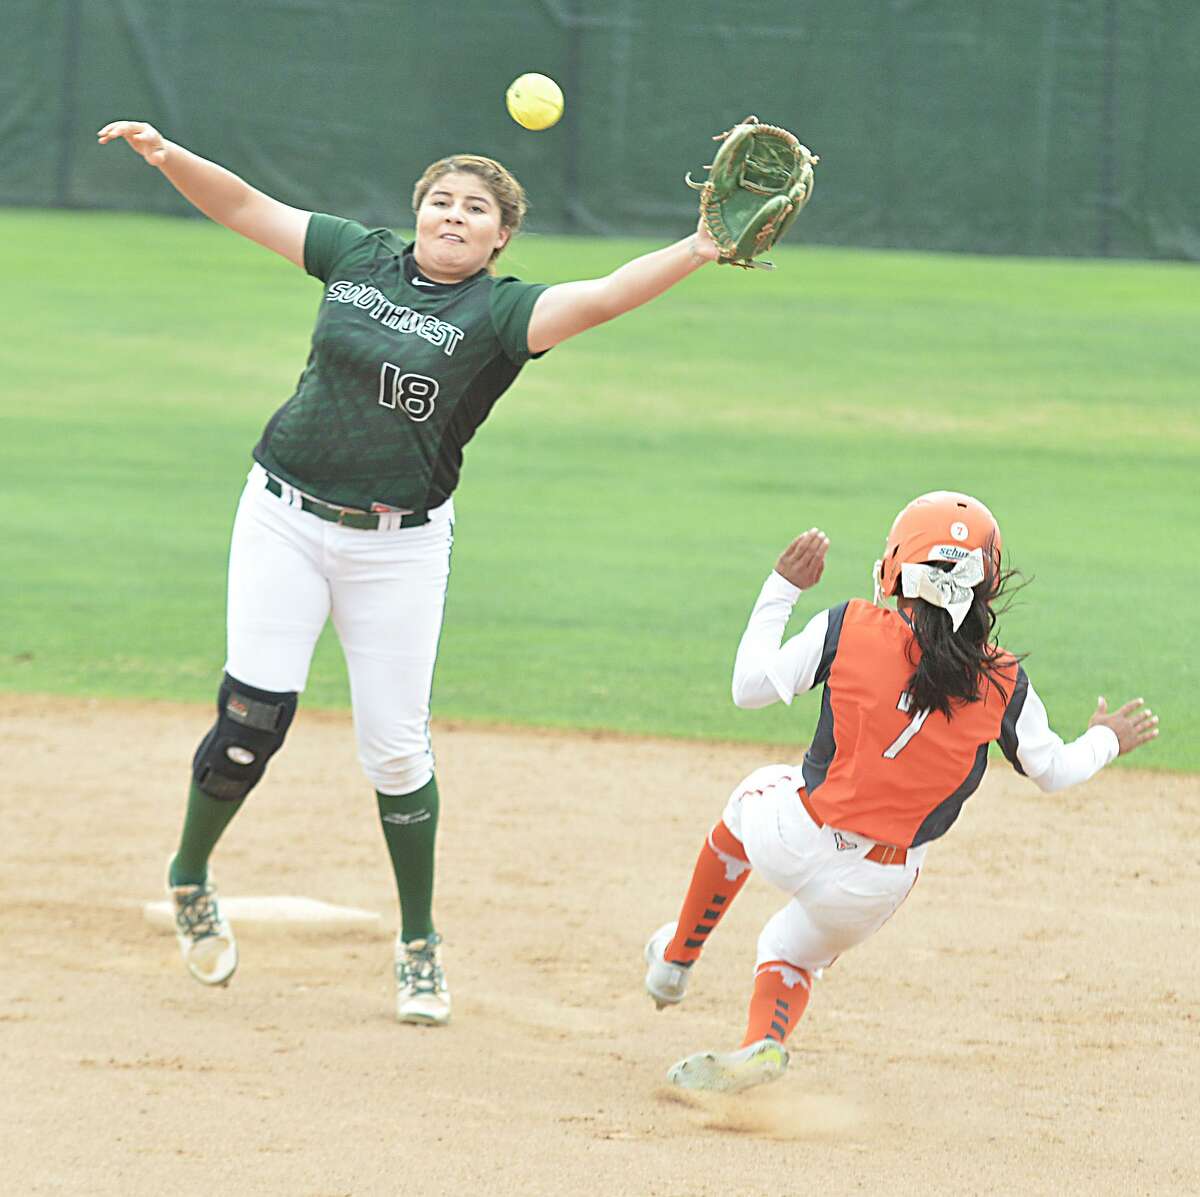 Daniela Ibañes and the Lady Longhorns swiped an upset Friday over second-place San Antonio Southwest winning 5-2 at the SAC.